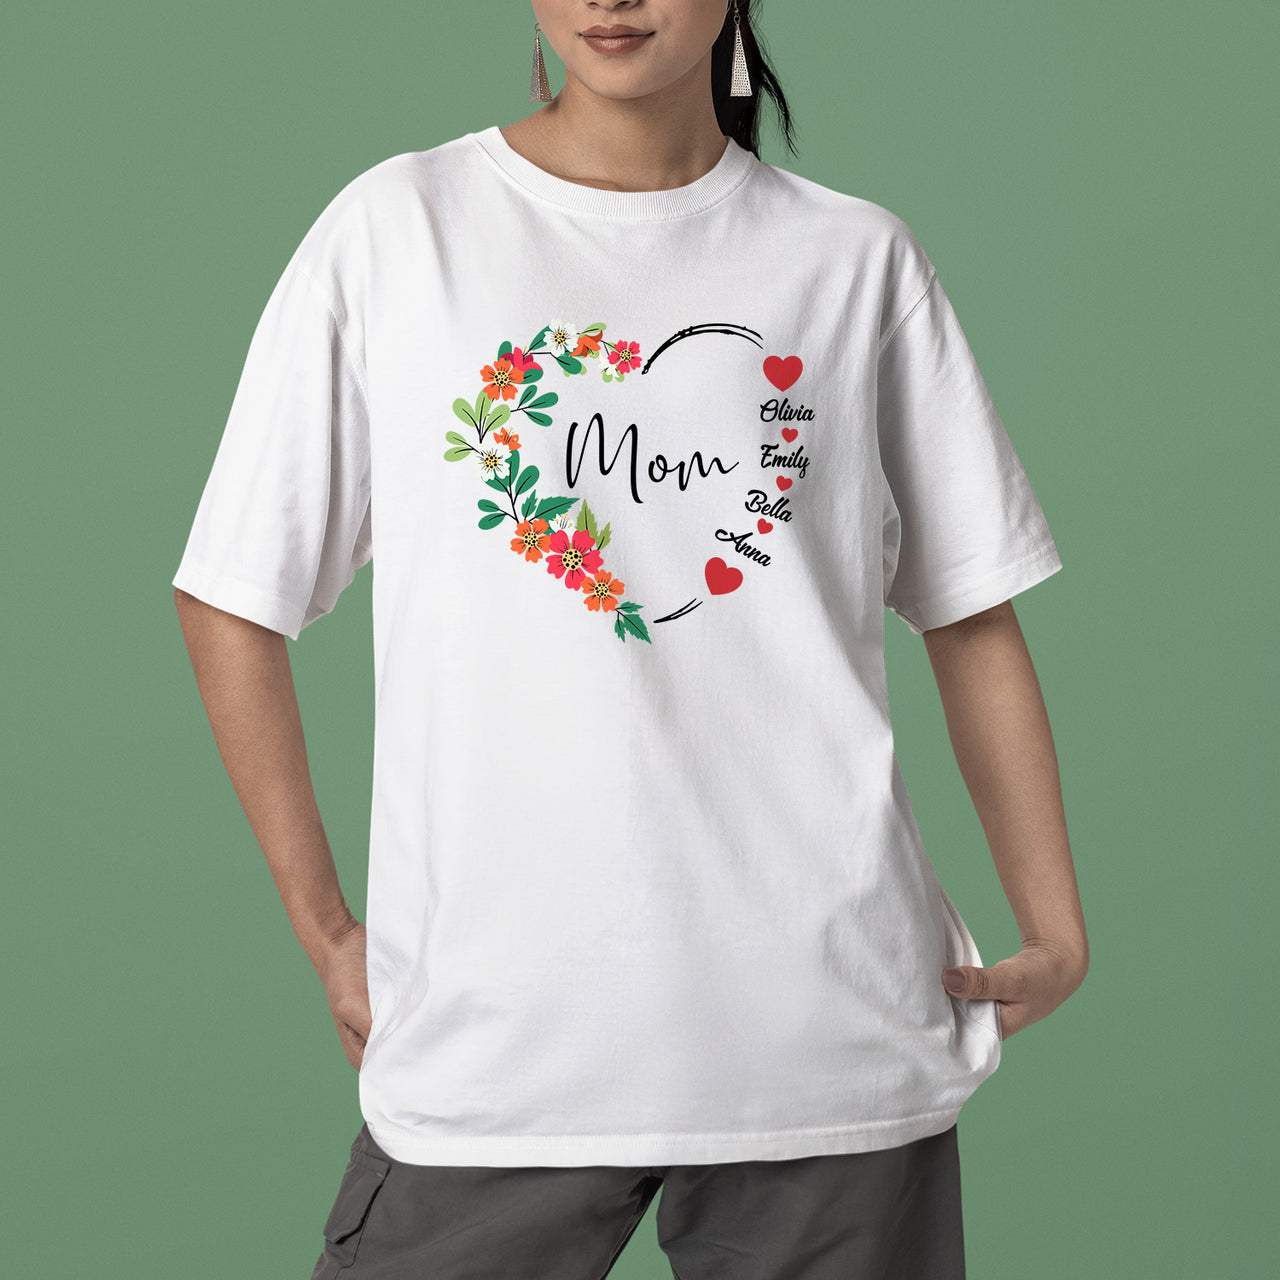 Custom Mom with Kids Names Shirt, Custom Gigi Heart Sweatshirt, Personalized Family T-Shirt, Your Name Floral Heart Sweater, Mama Shirt, Mom Shirt, Mother's Day Gift, Happy Mother’s Day